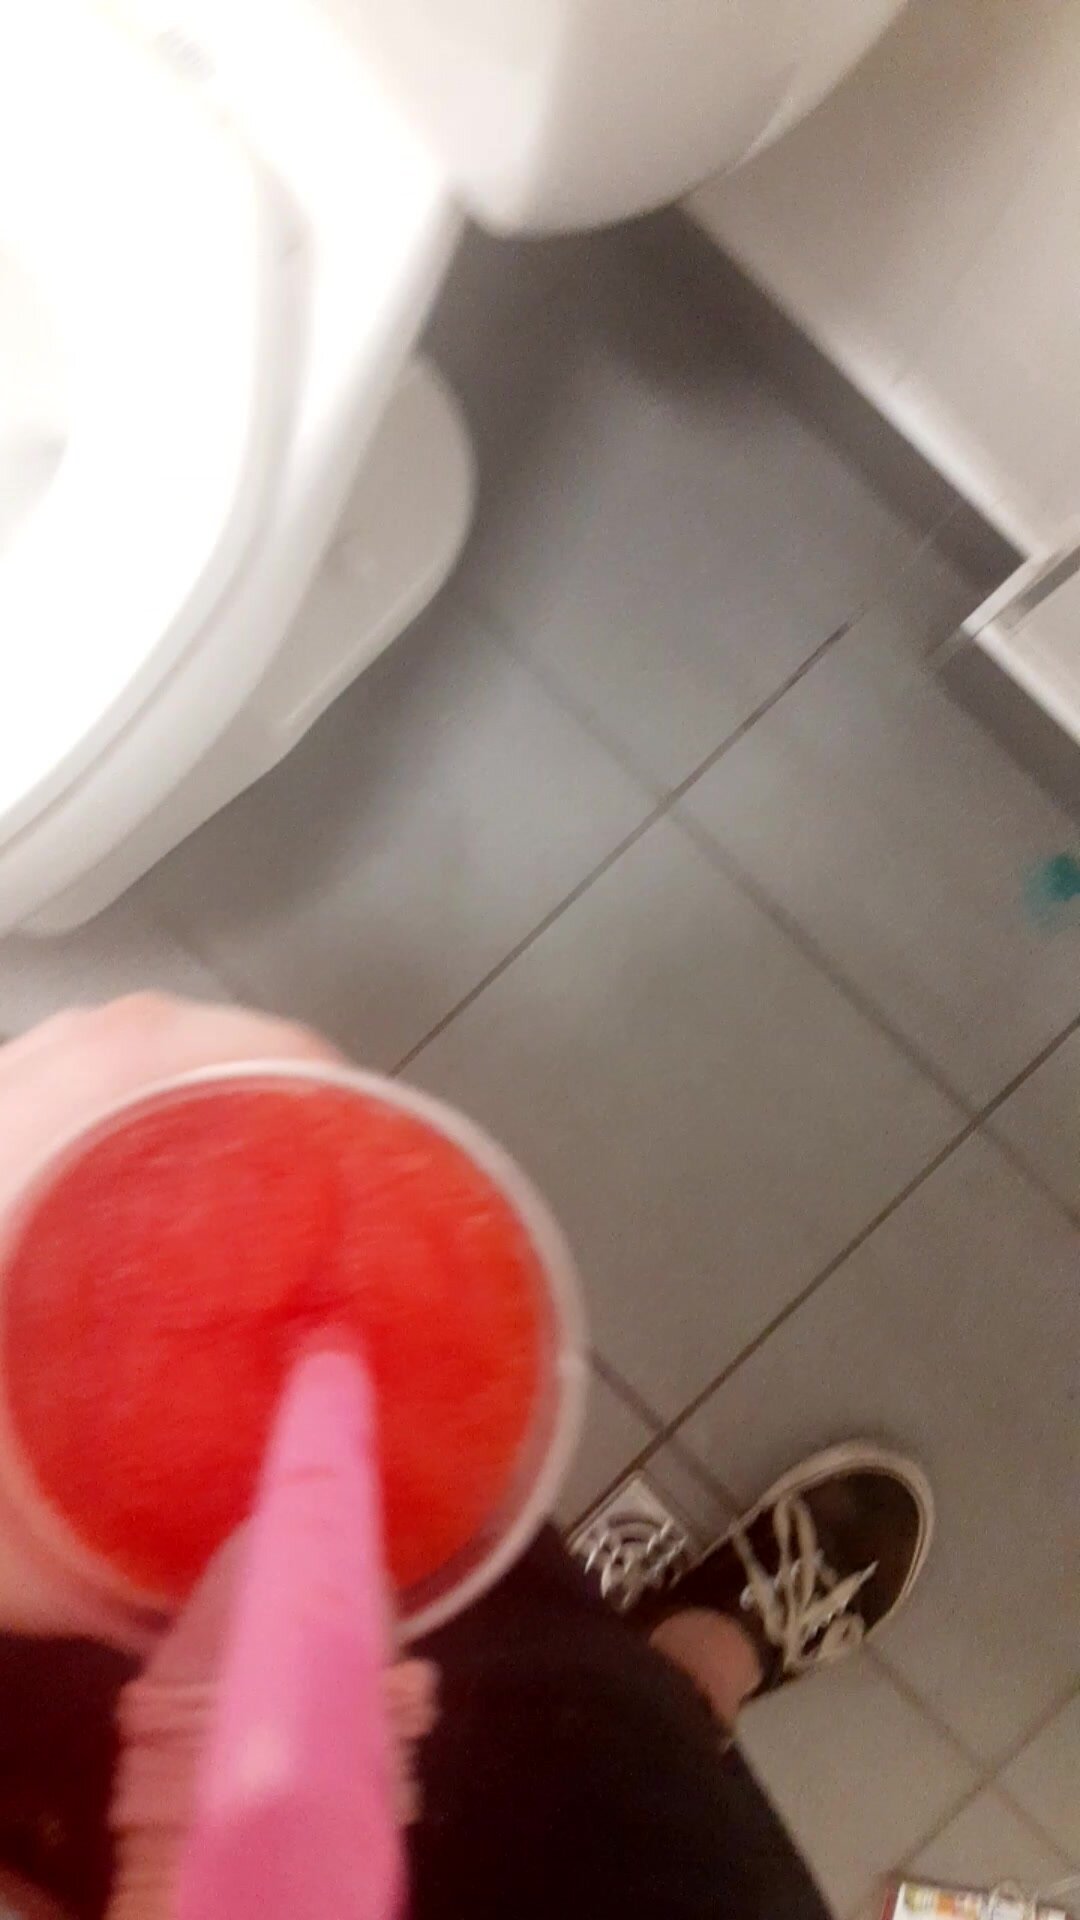 I buy a slush for my slutty mother and I piss in it!